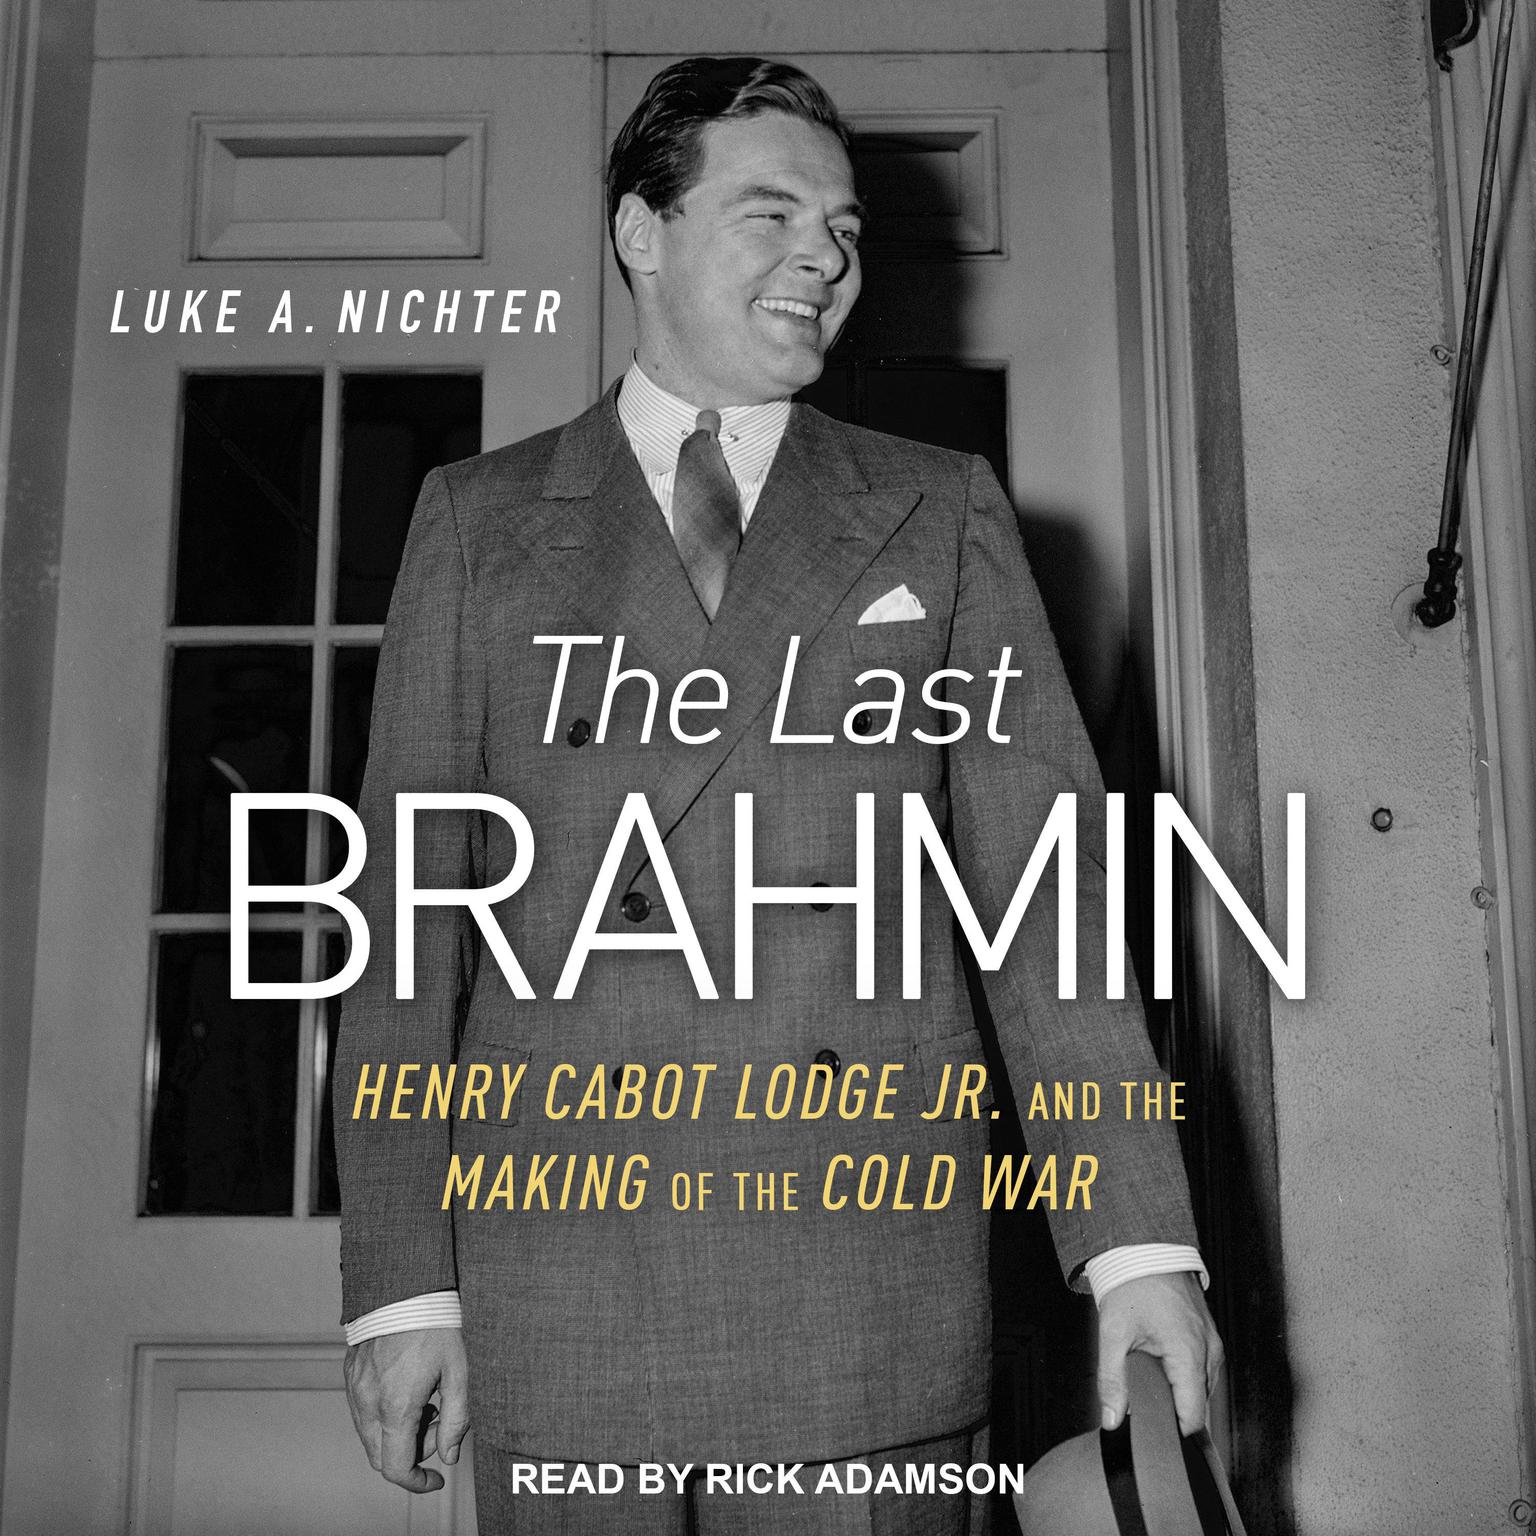 The Last Brahmin: Henry Cabot Lodge Jr. and the Making of the Cold War Audiobook, by Luke A. Nichter